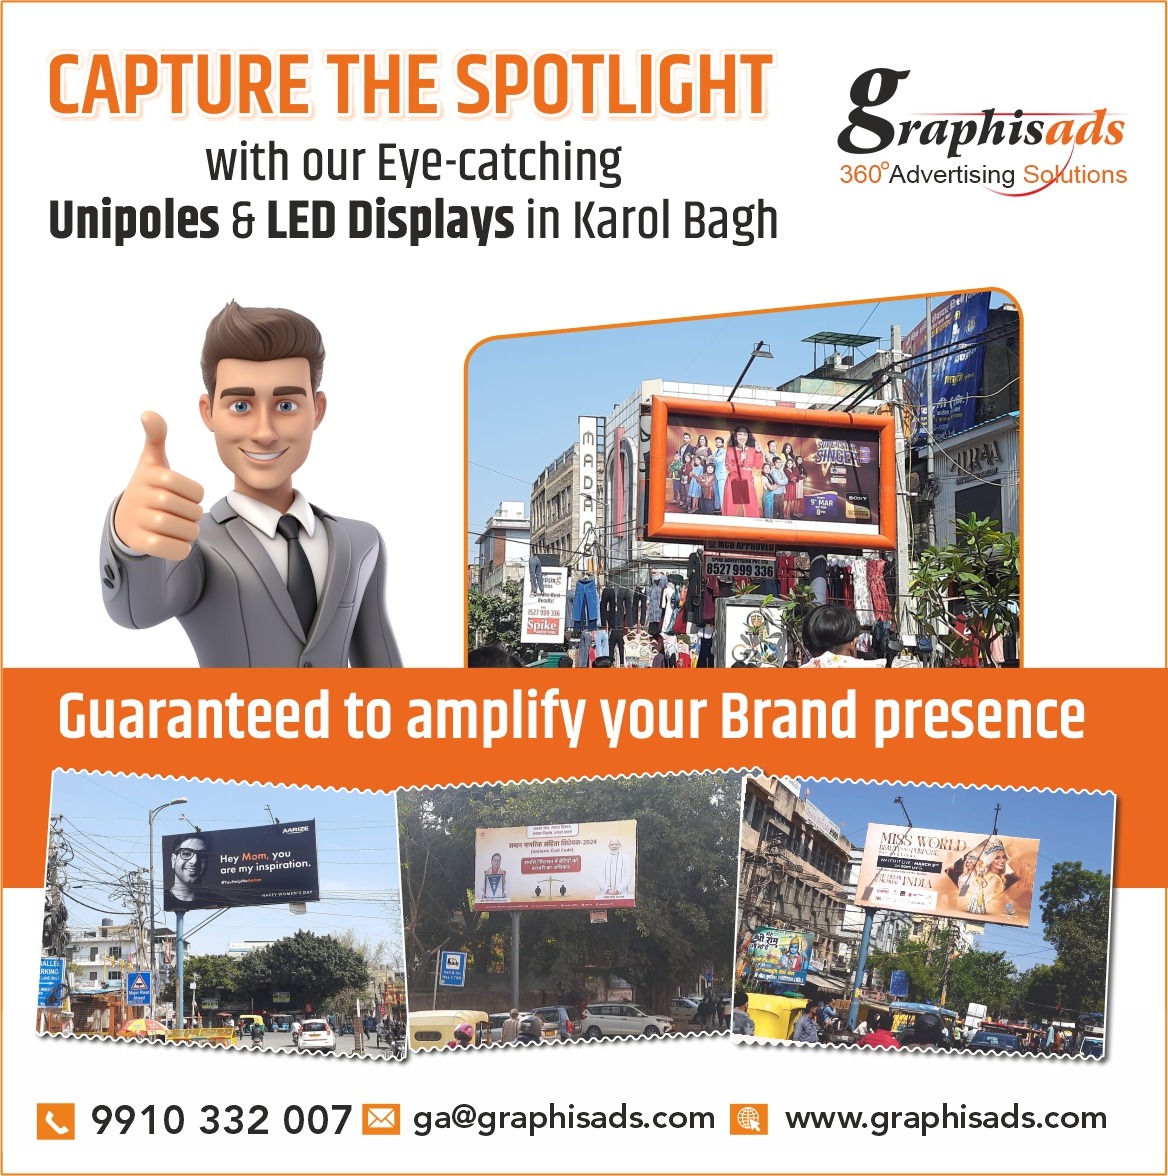 Elevate your brand's visibility with our strategically positioned Unipoles & vibrant LED displays in Karol Bagh. 

#unipoles #leddispla #karolbagh #outdoormedia #advertiseyourbrand #businesshub #karolbaghmarket #advertisingagency #graphisadslimited #360degreeadvertising